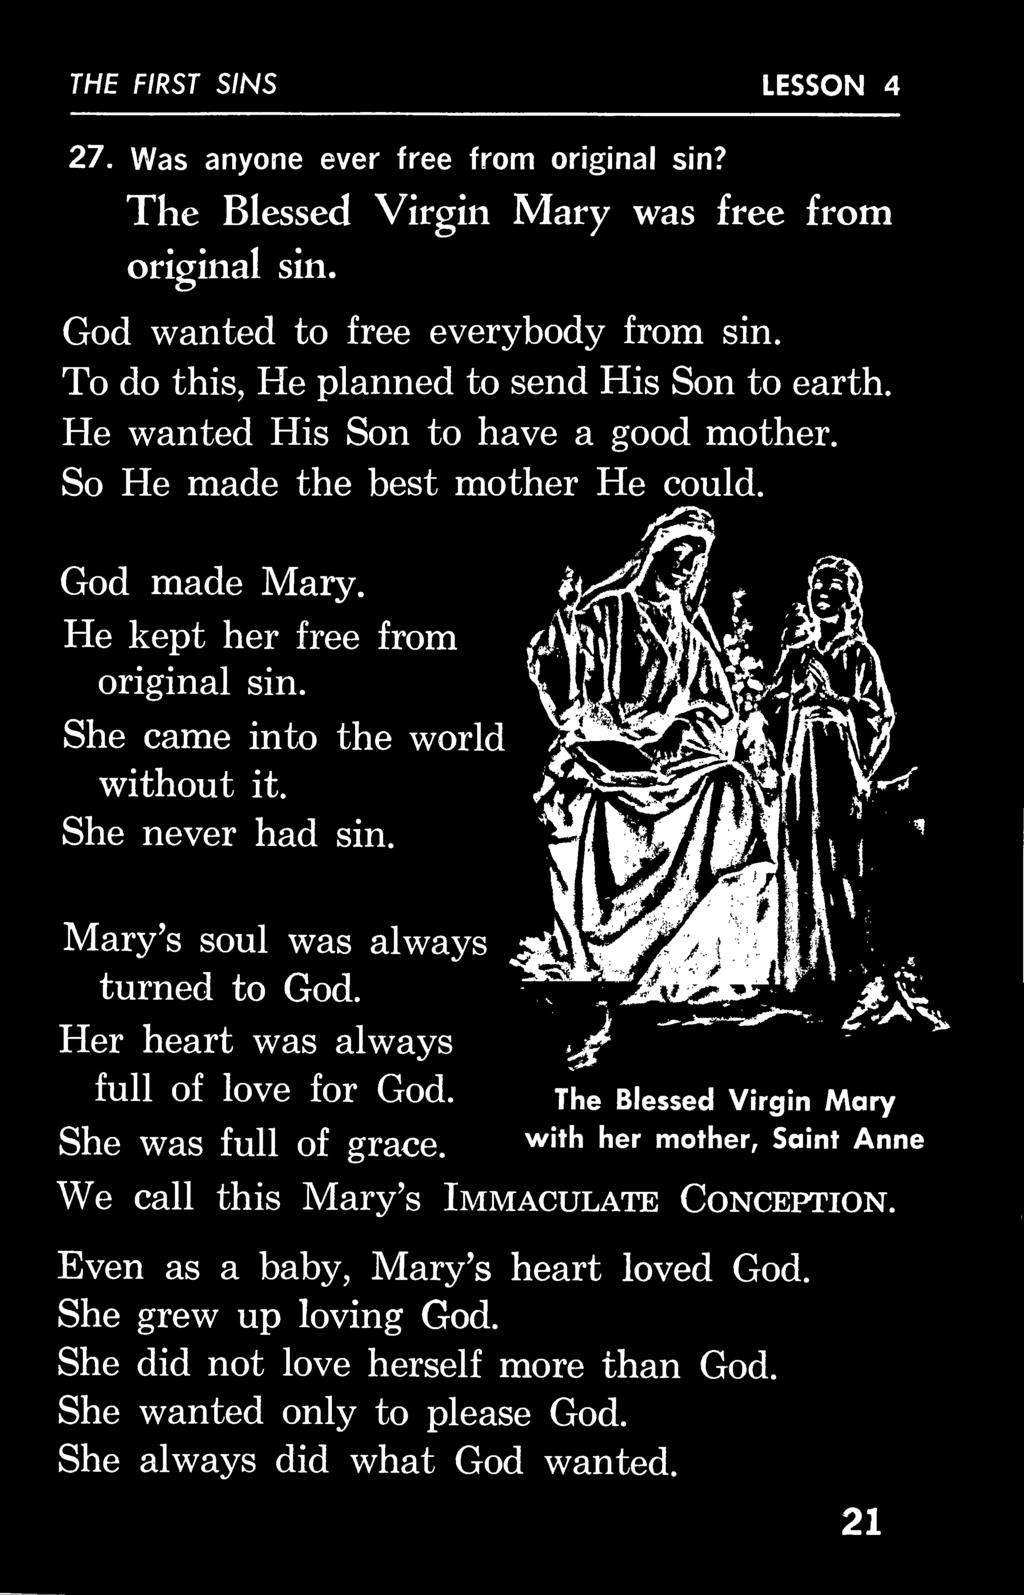 was always Her heart was always full of love for God. The Blessed Virgin Mary She was full of grace.